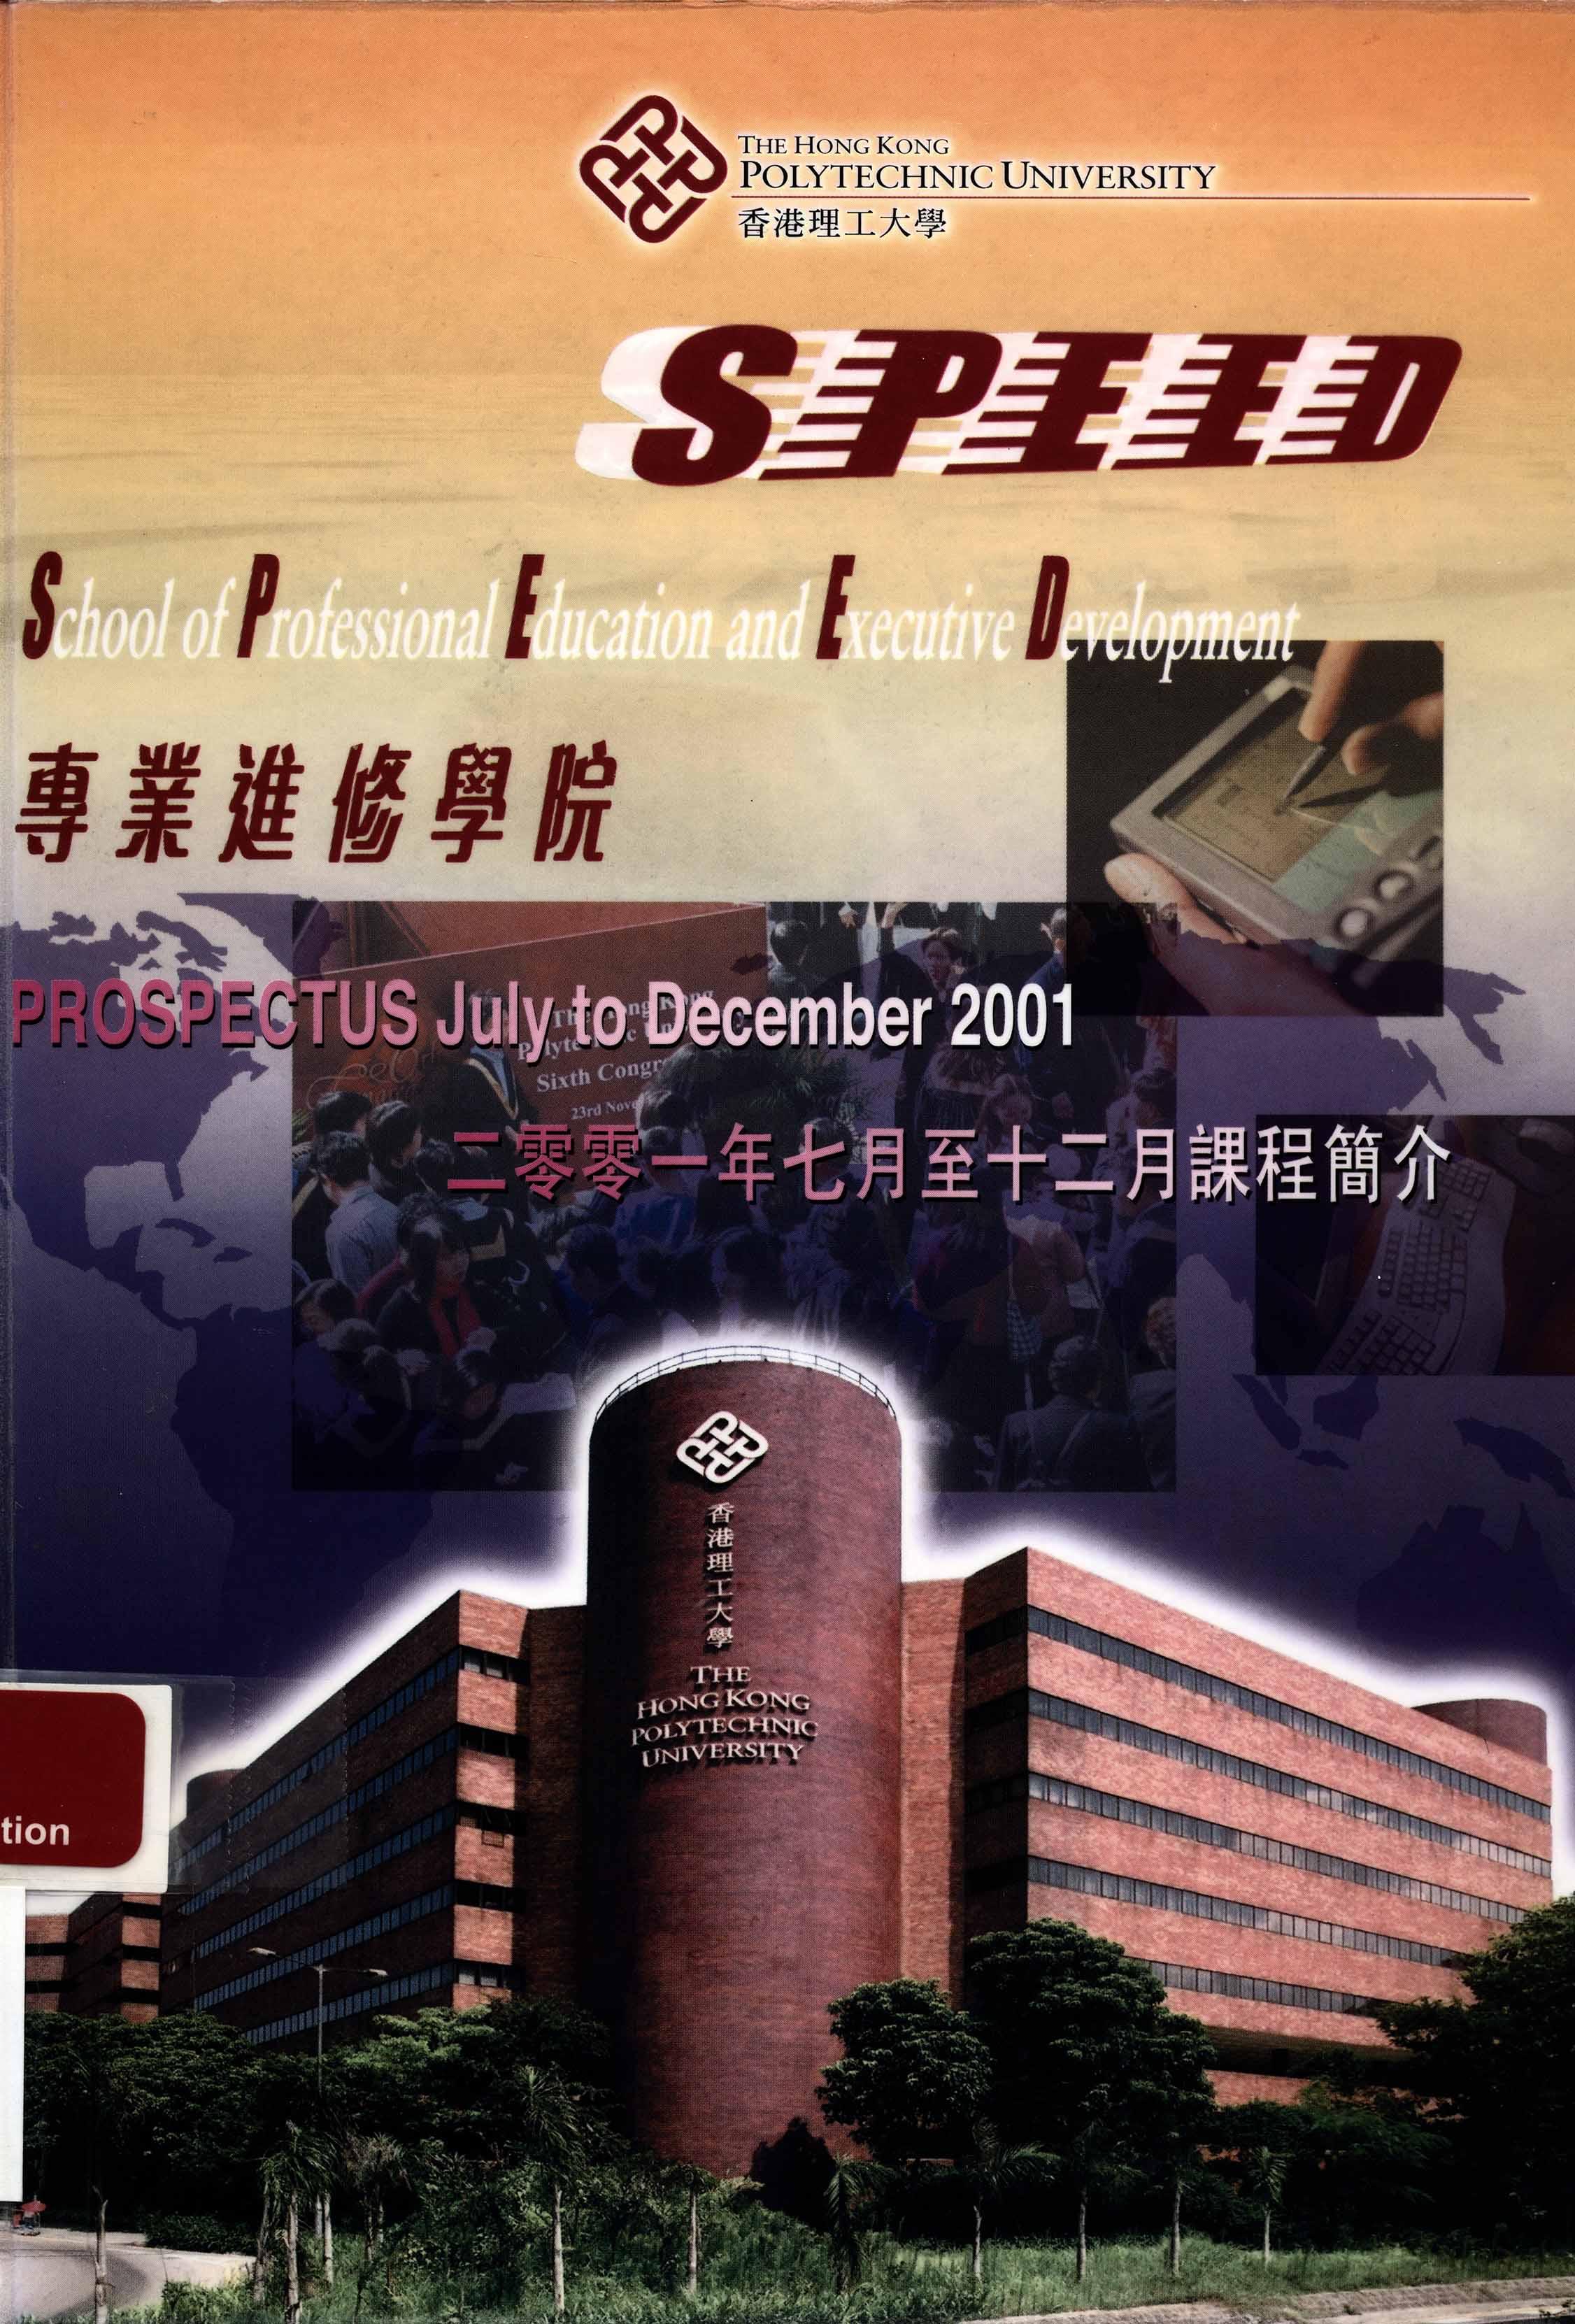 Prospectus [School of Professional Education and Executive Development (SPEED) - July to Dec 2001]